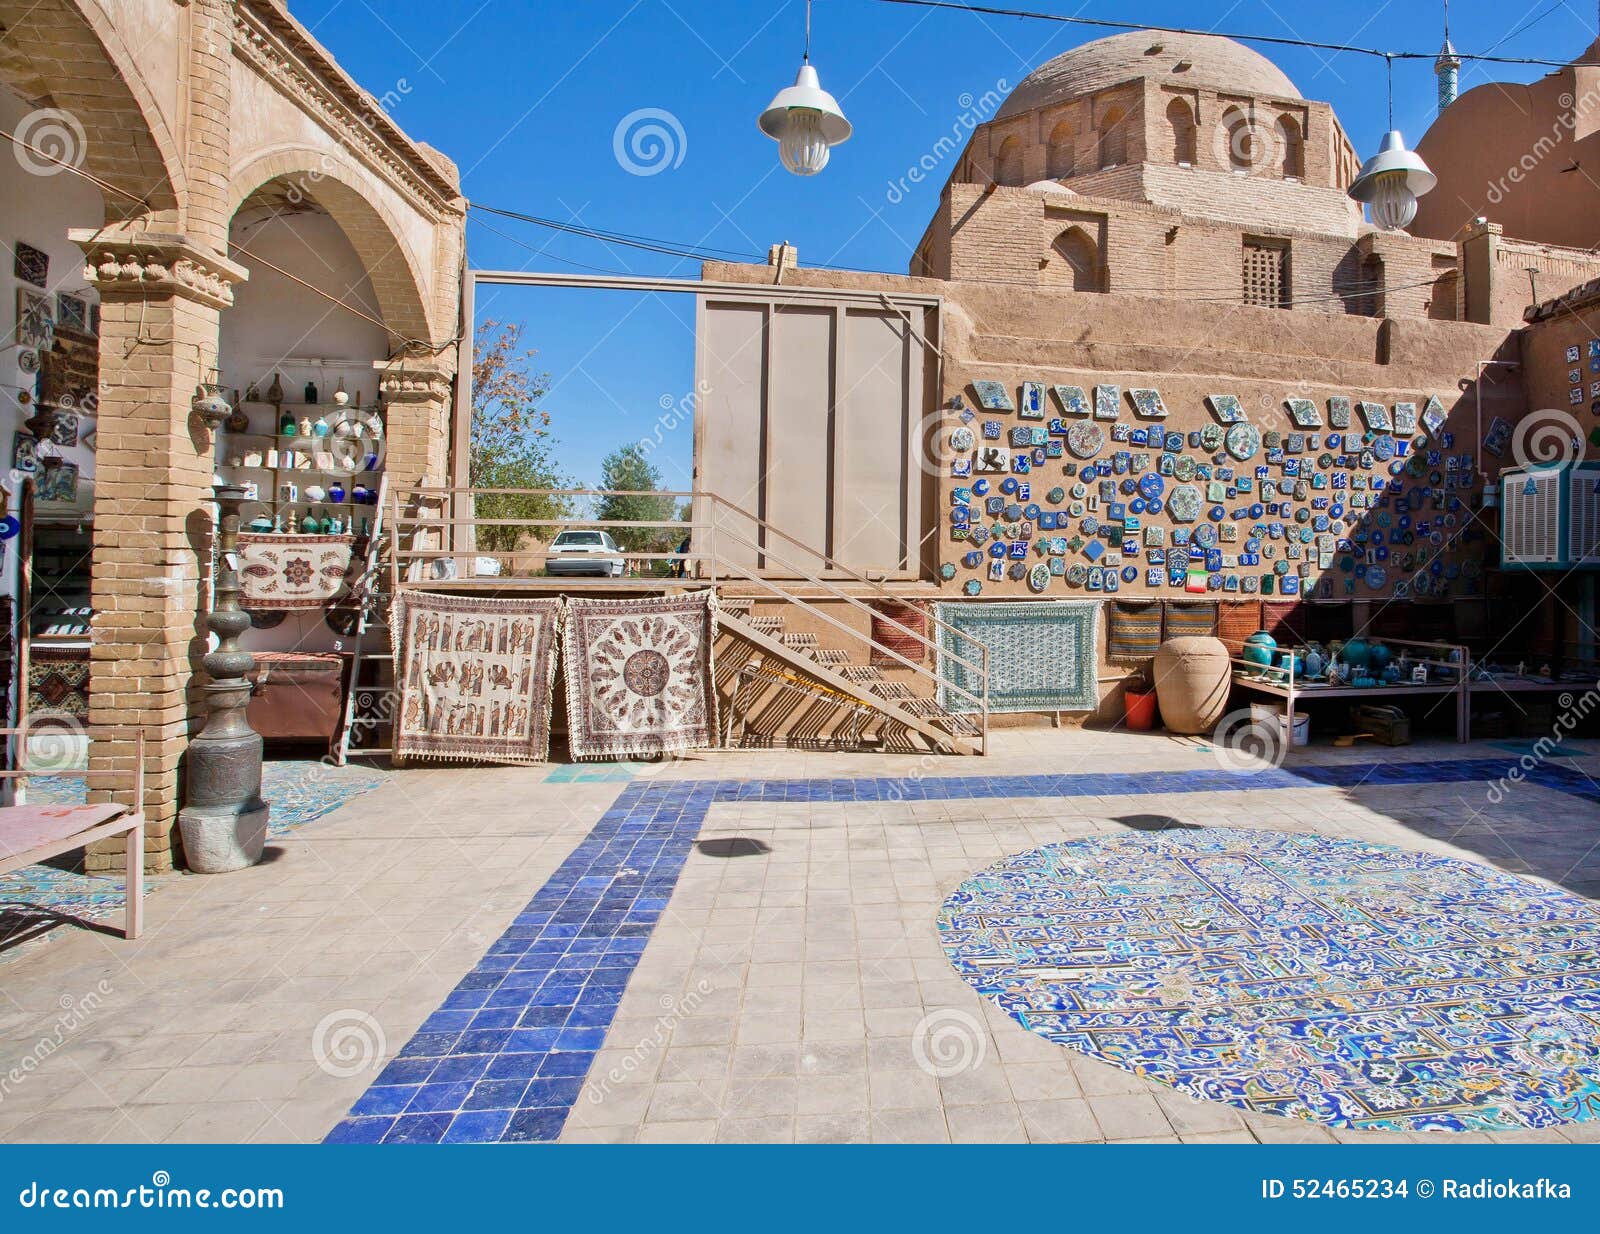 Marketplace in Oriental Style in Historical Town with Tiled Courtyards